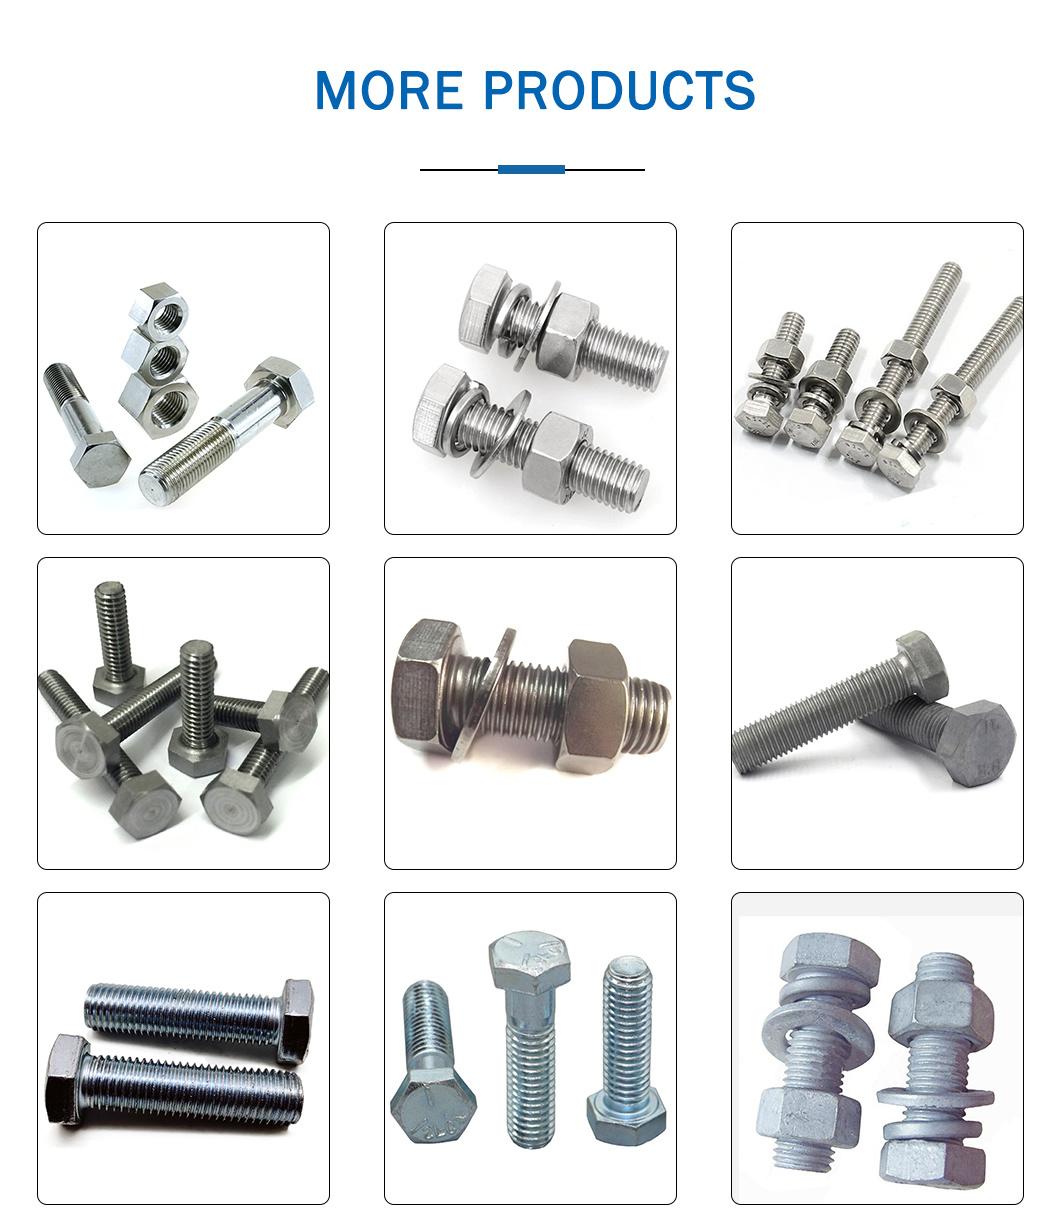 High Quality Fastener Hardware Grade 8.8 Stainless Steel Carbon Steel DIN931 DIN933 Hex Head Nut and Bolt